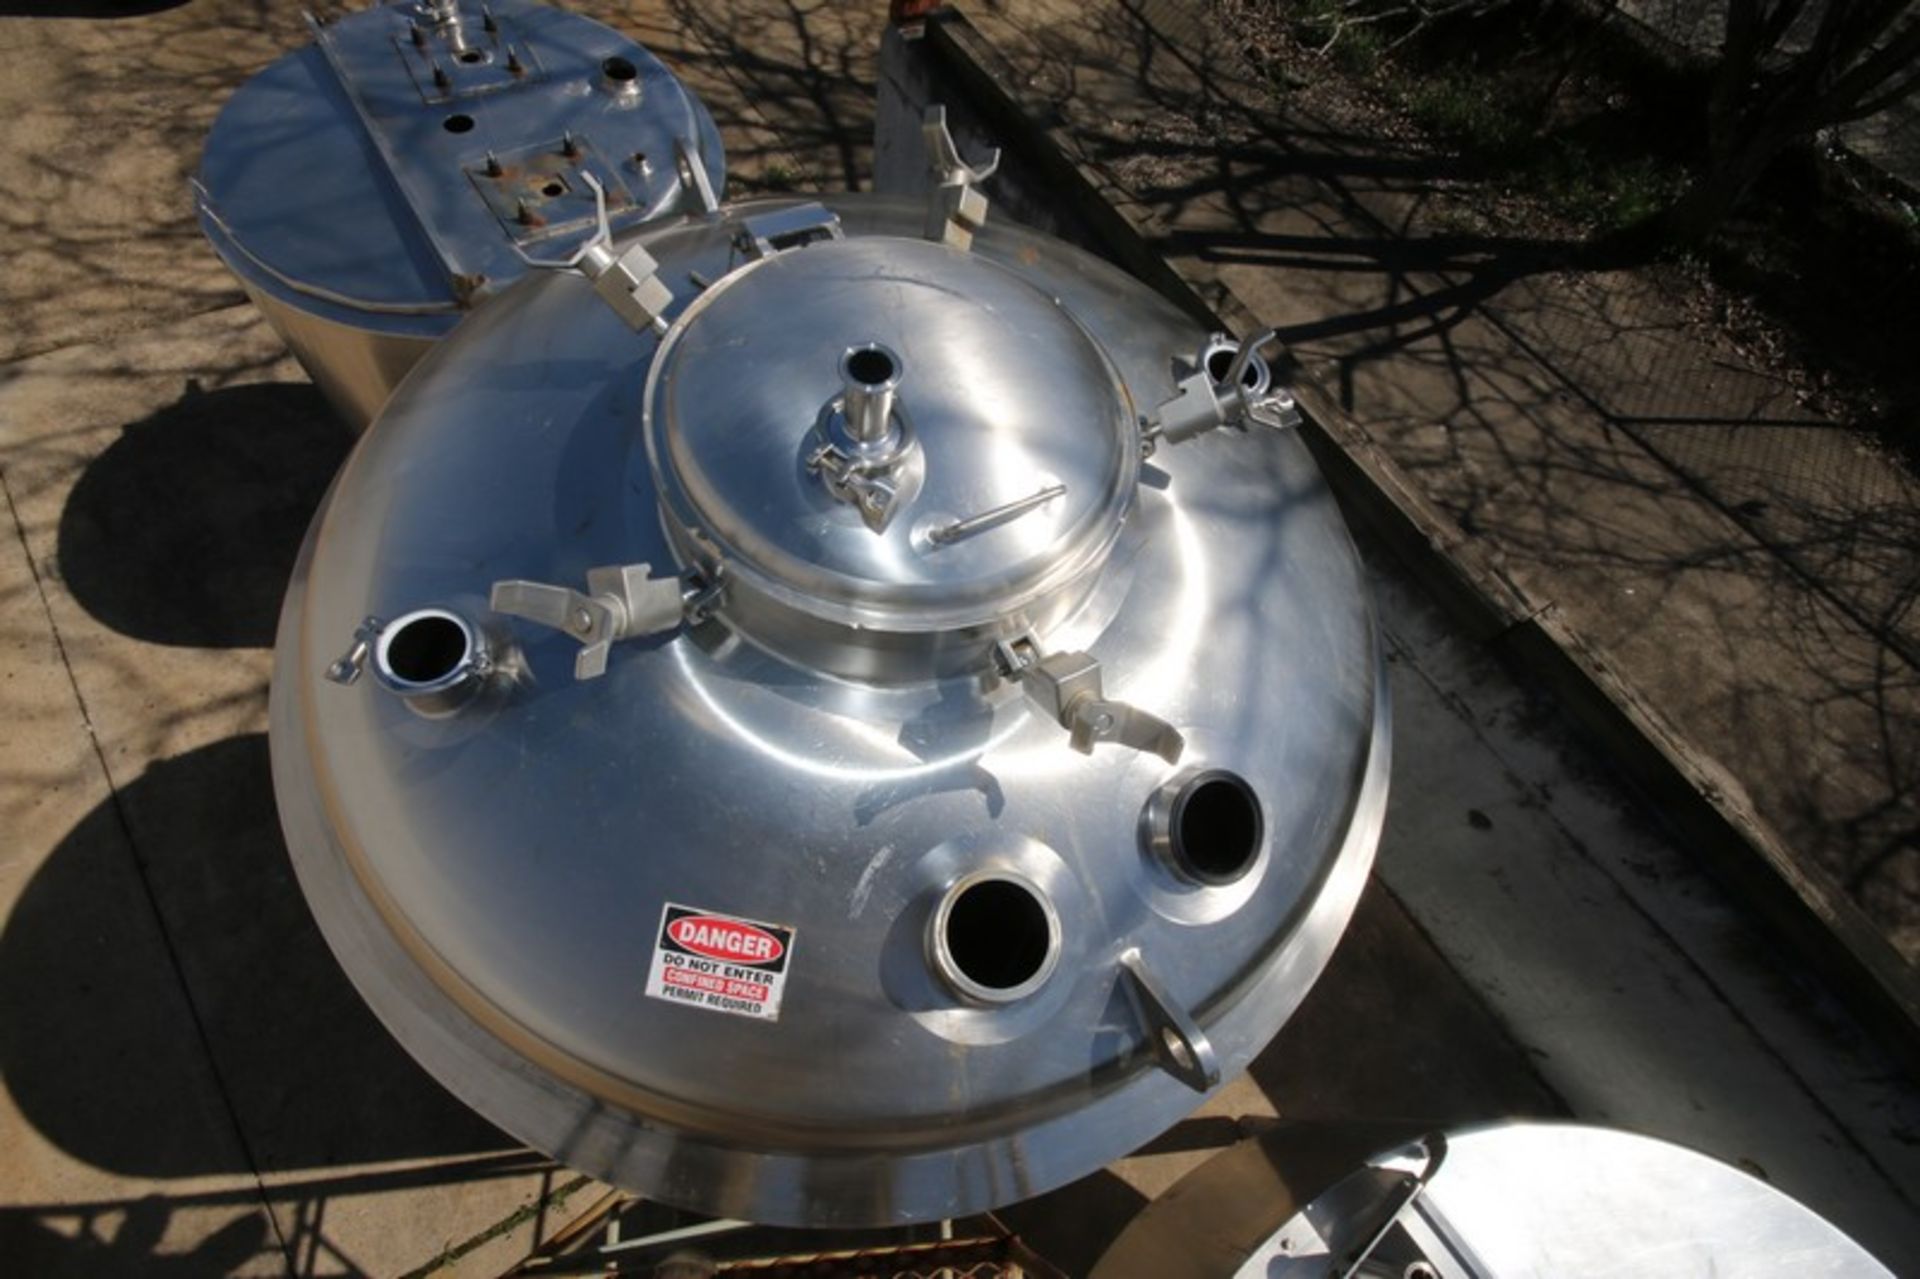 DCI Aprox. 660 (2500 Liter) Reactor Body, S/S Tank with Dished Heads, SN JS2295, Internal Rated 60 - Image 3 of 10